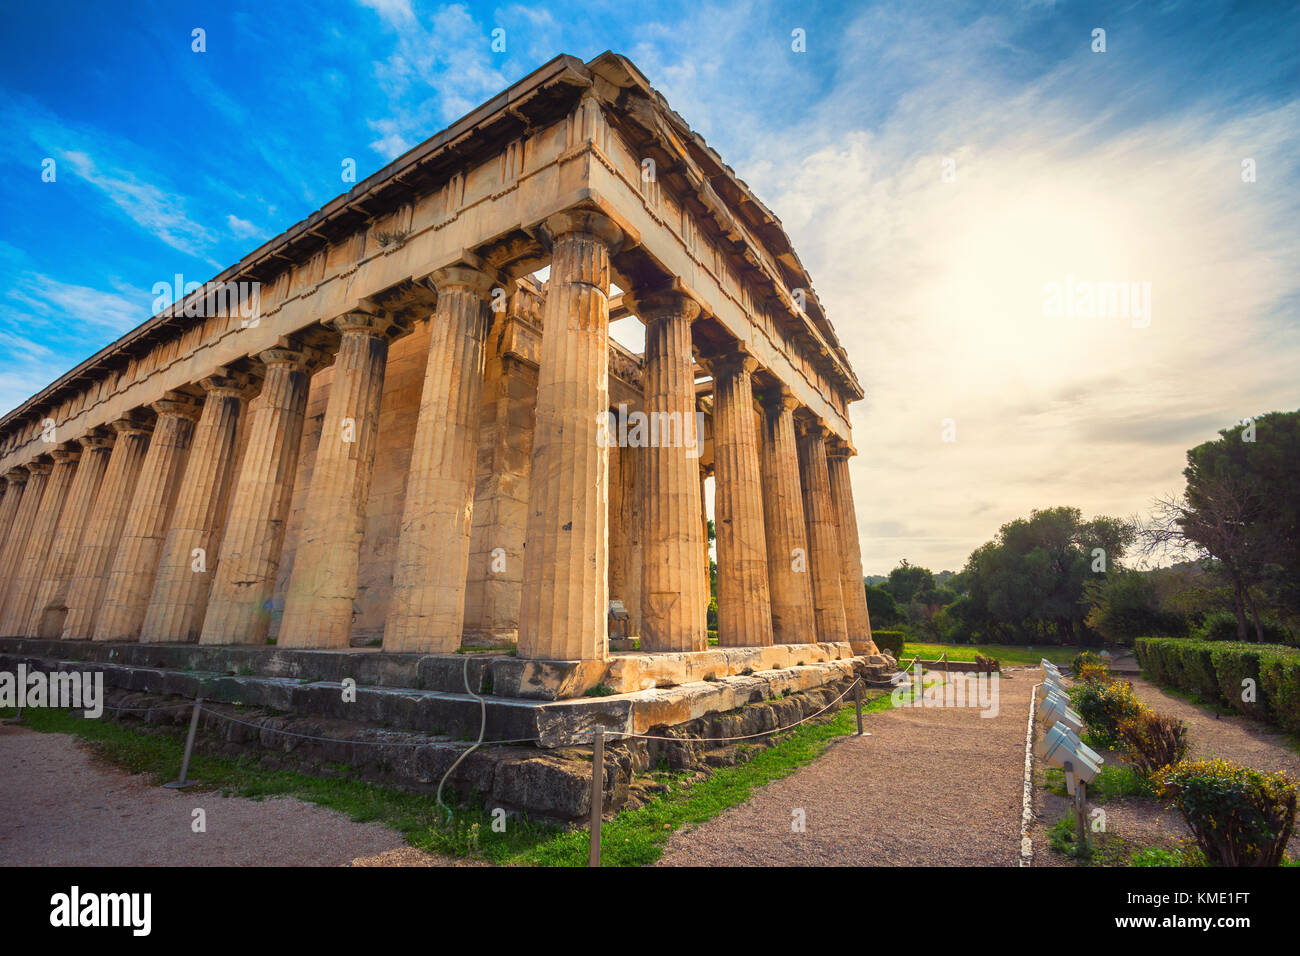 The Temple of Hephaestus in ancient market (agora) under the rock of Acropolis, Athens, Greece. Stock Photo